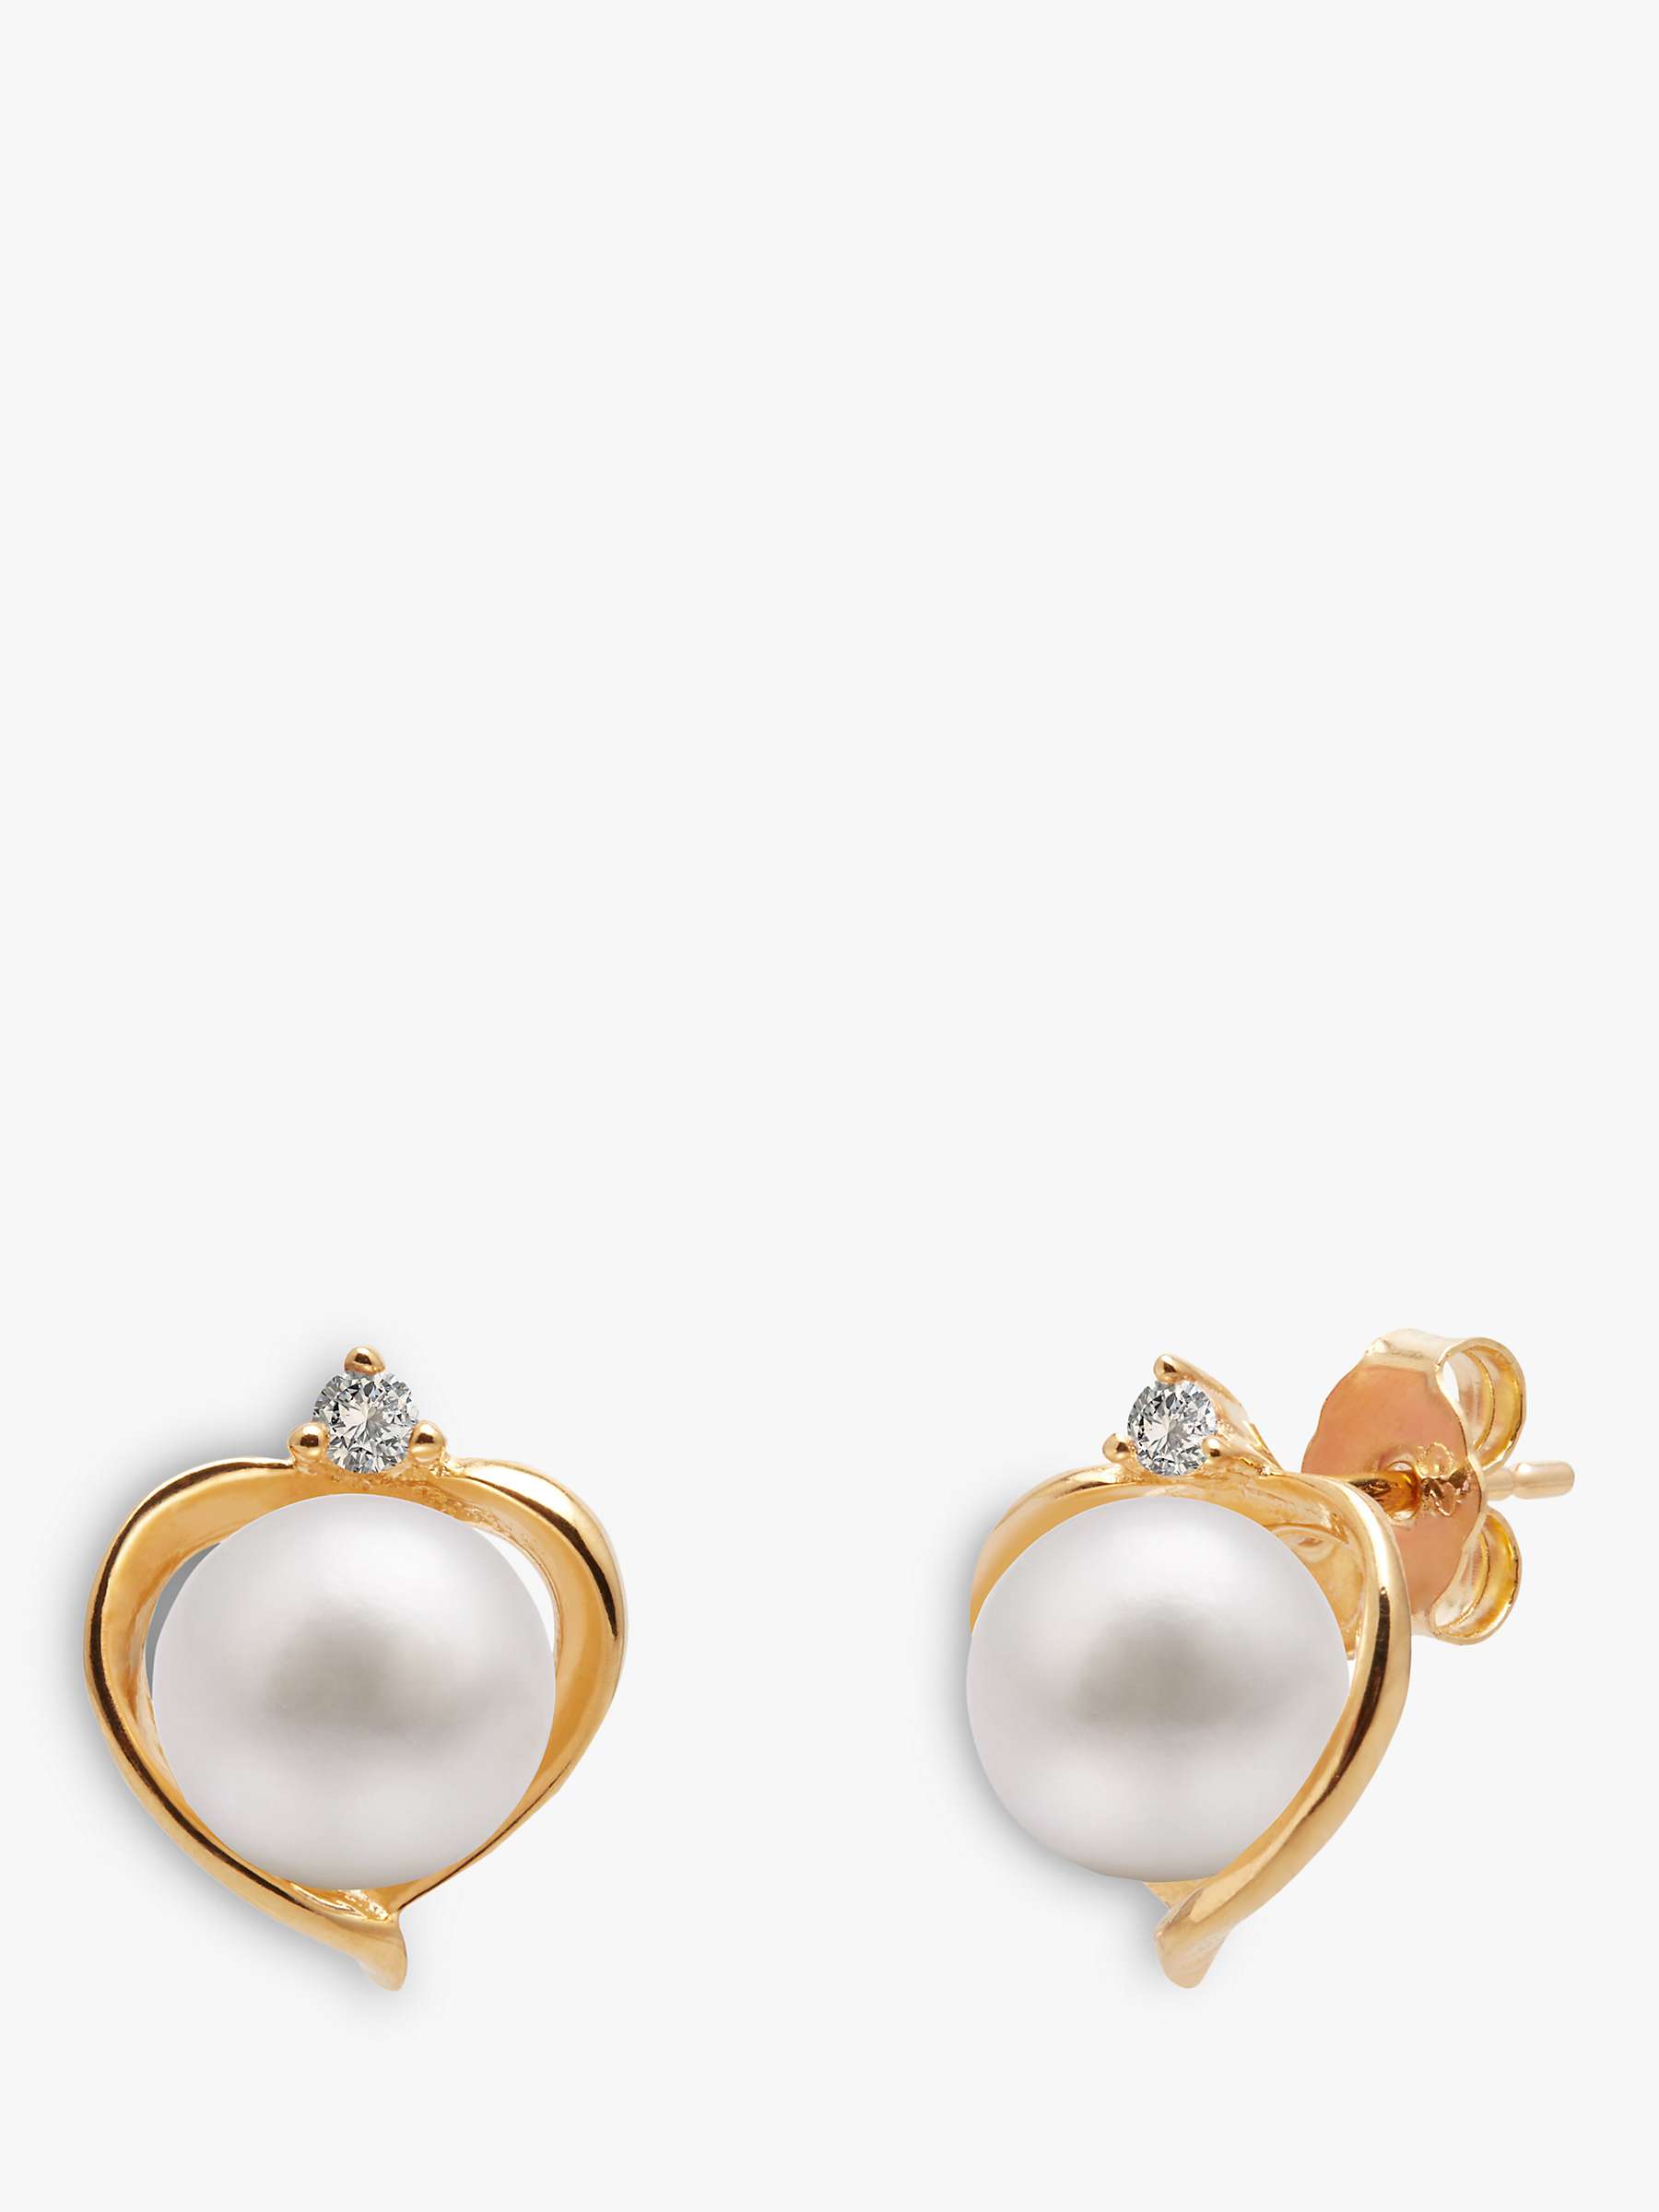 Buy A B Davis 9ct Gold Freshwater Pearl and Topaz Heart Stud Earrings, White Online at johnlewis.com